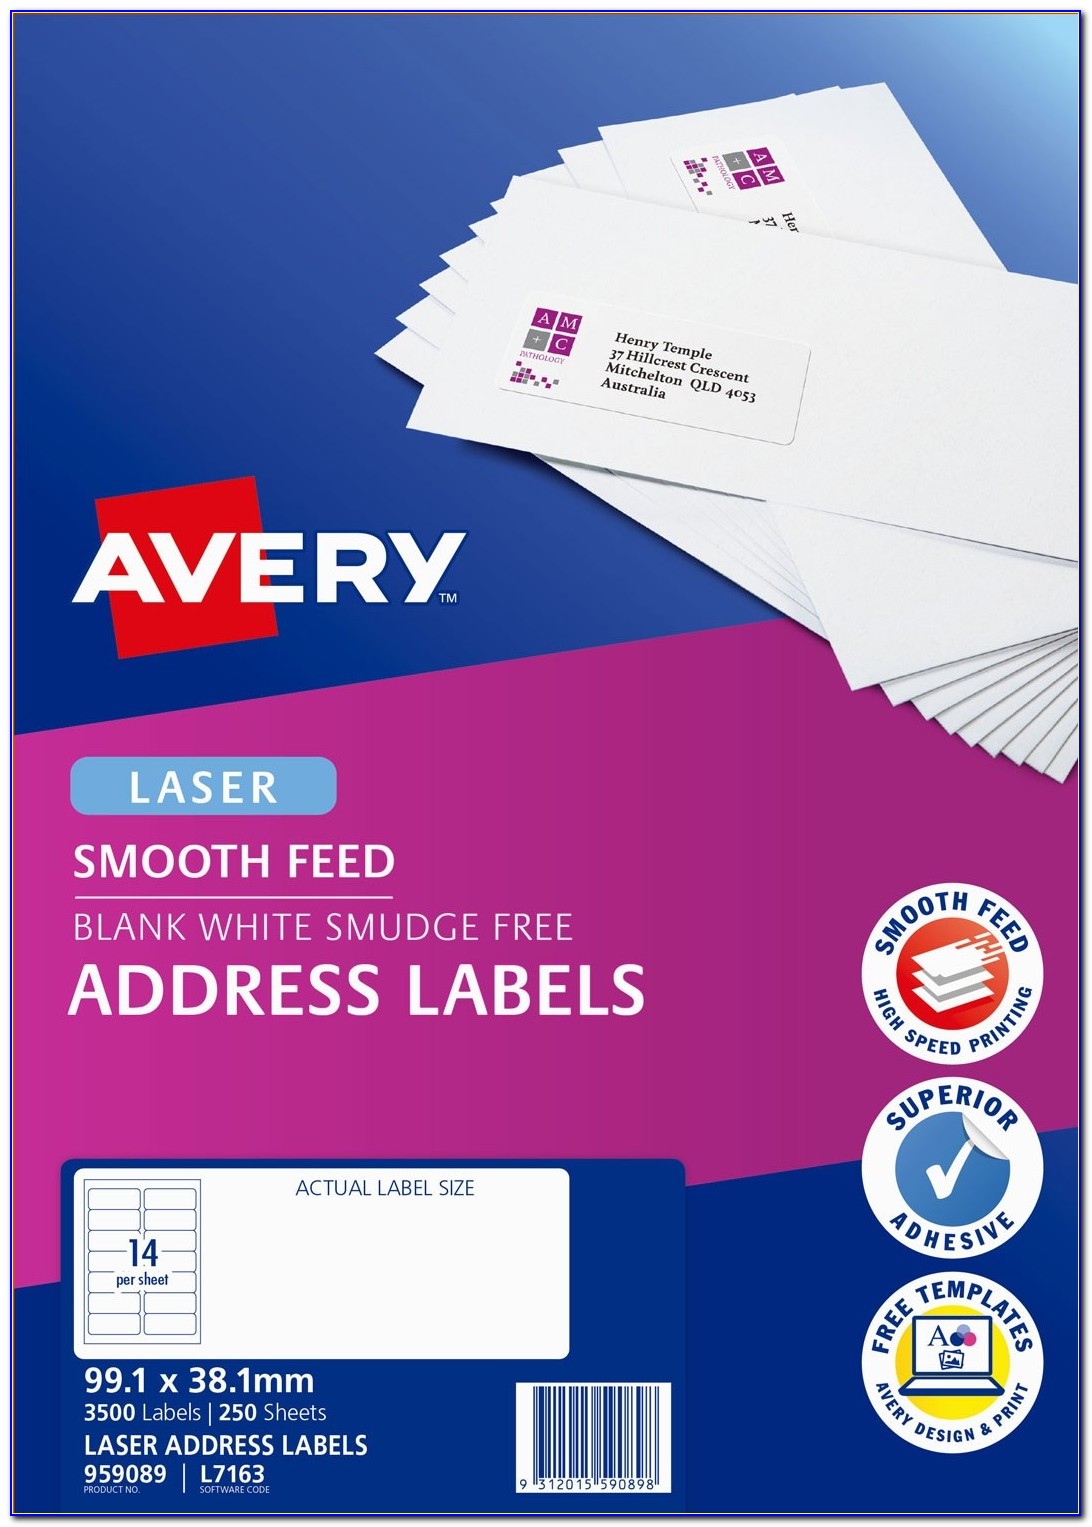 avery-label-template-download-5161